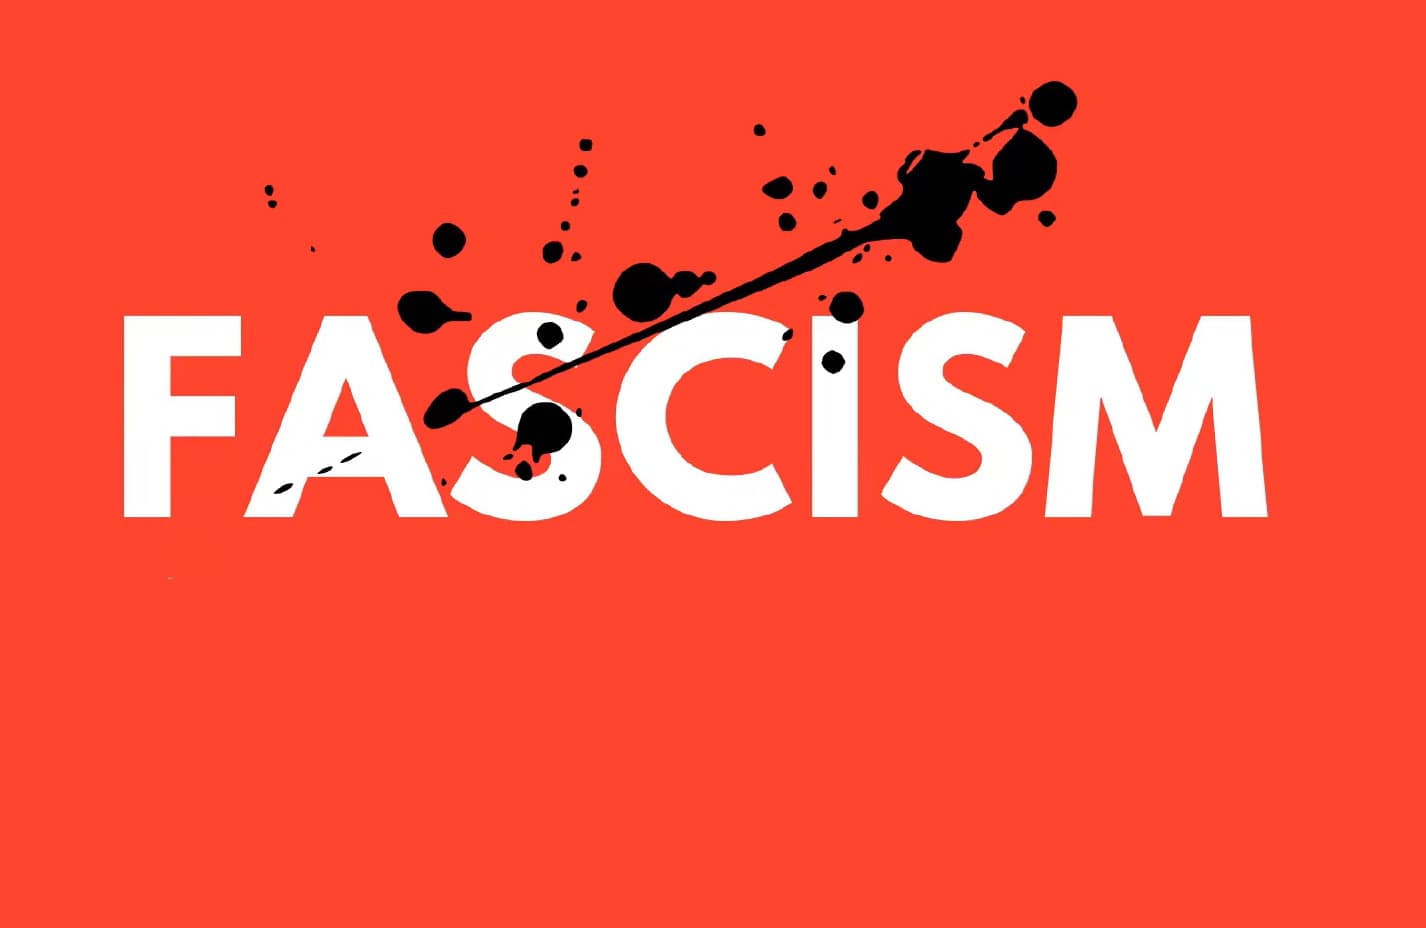 27 interesting facts about Fascism